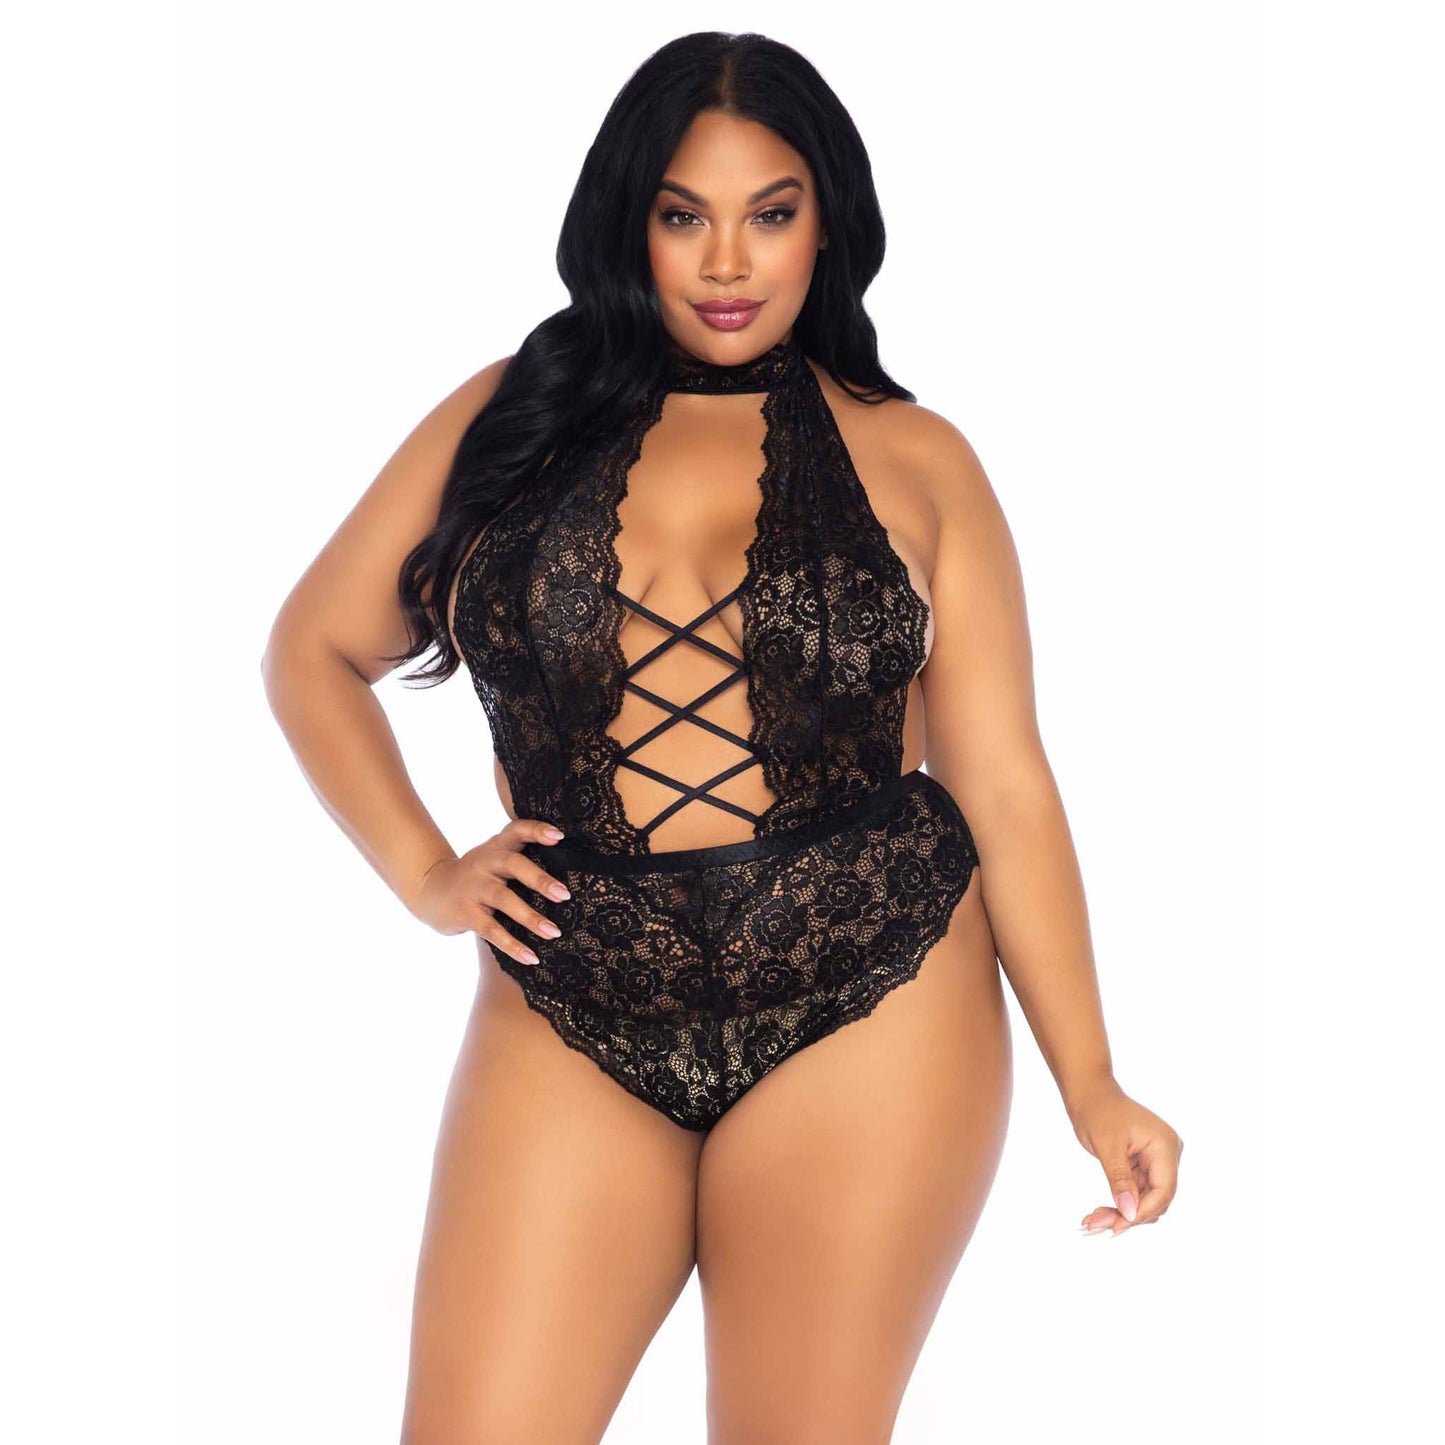 Floral Lace Crotchless Teddy - 1x/2x - Black